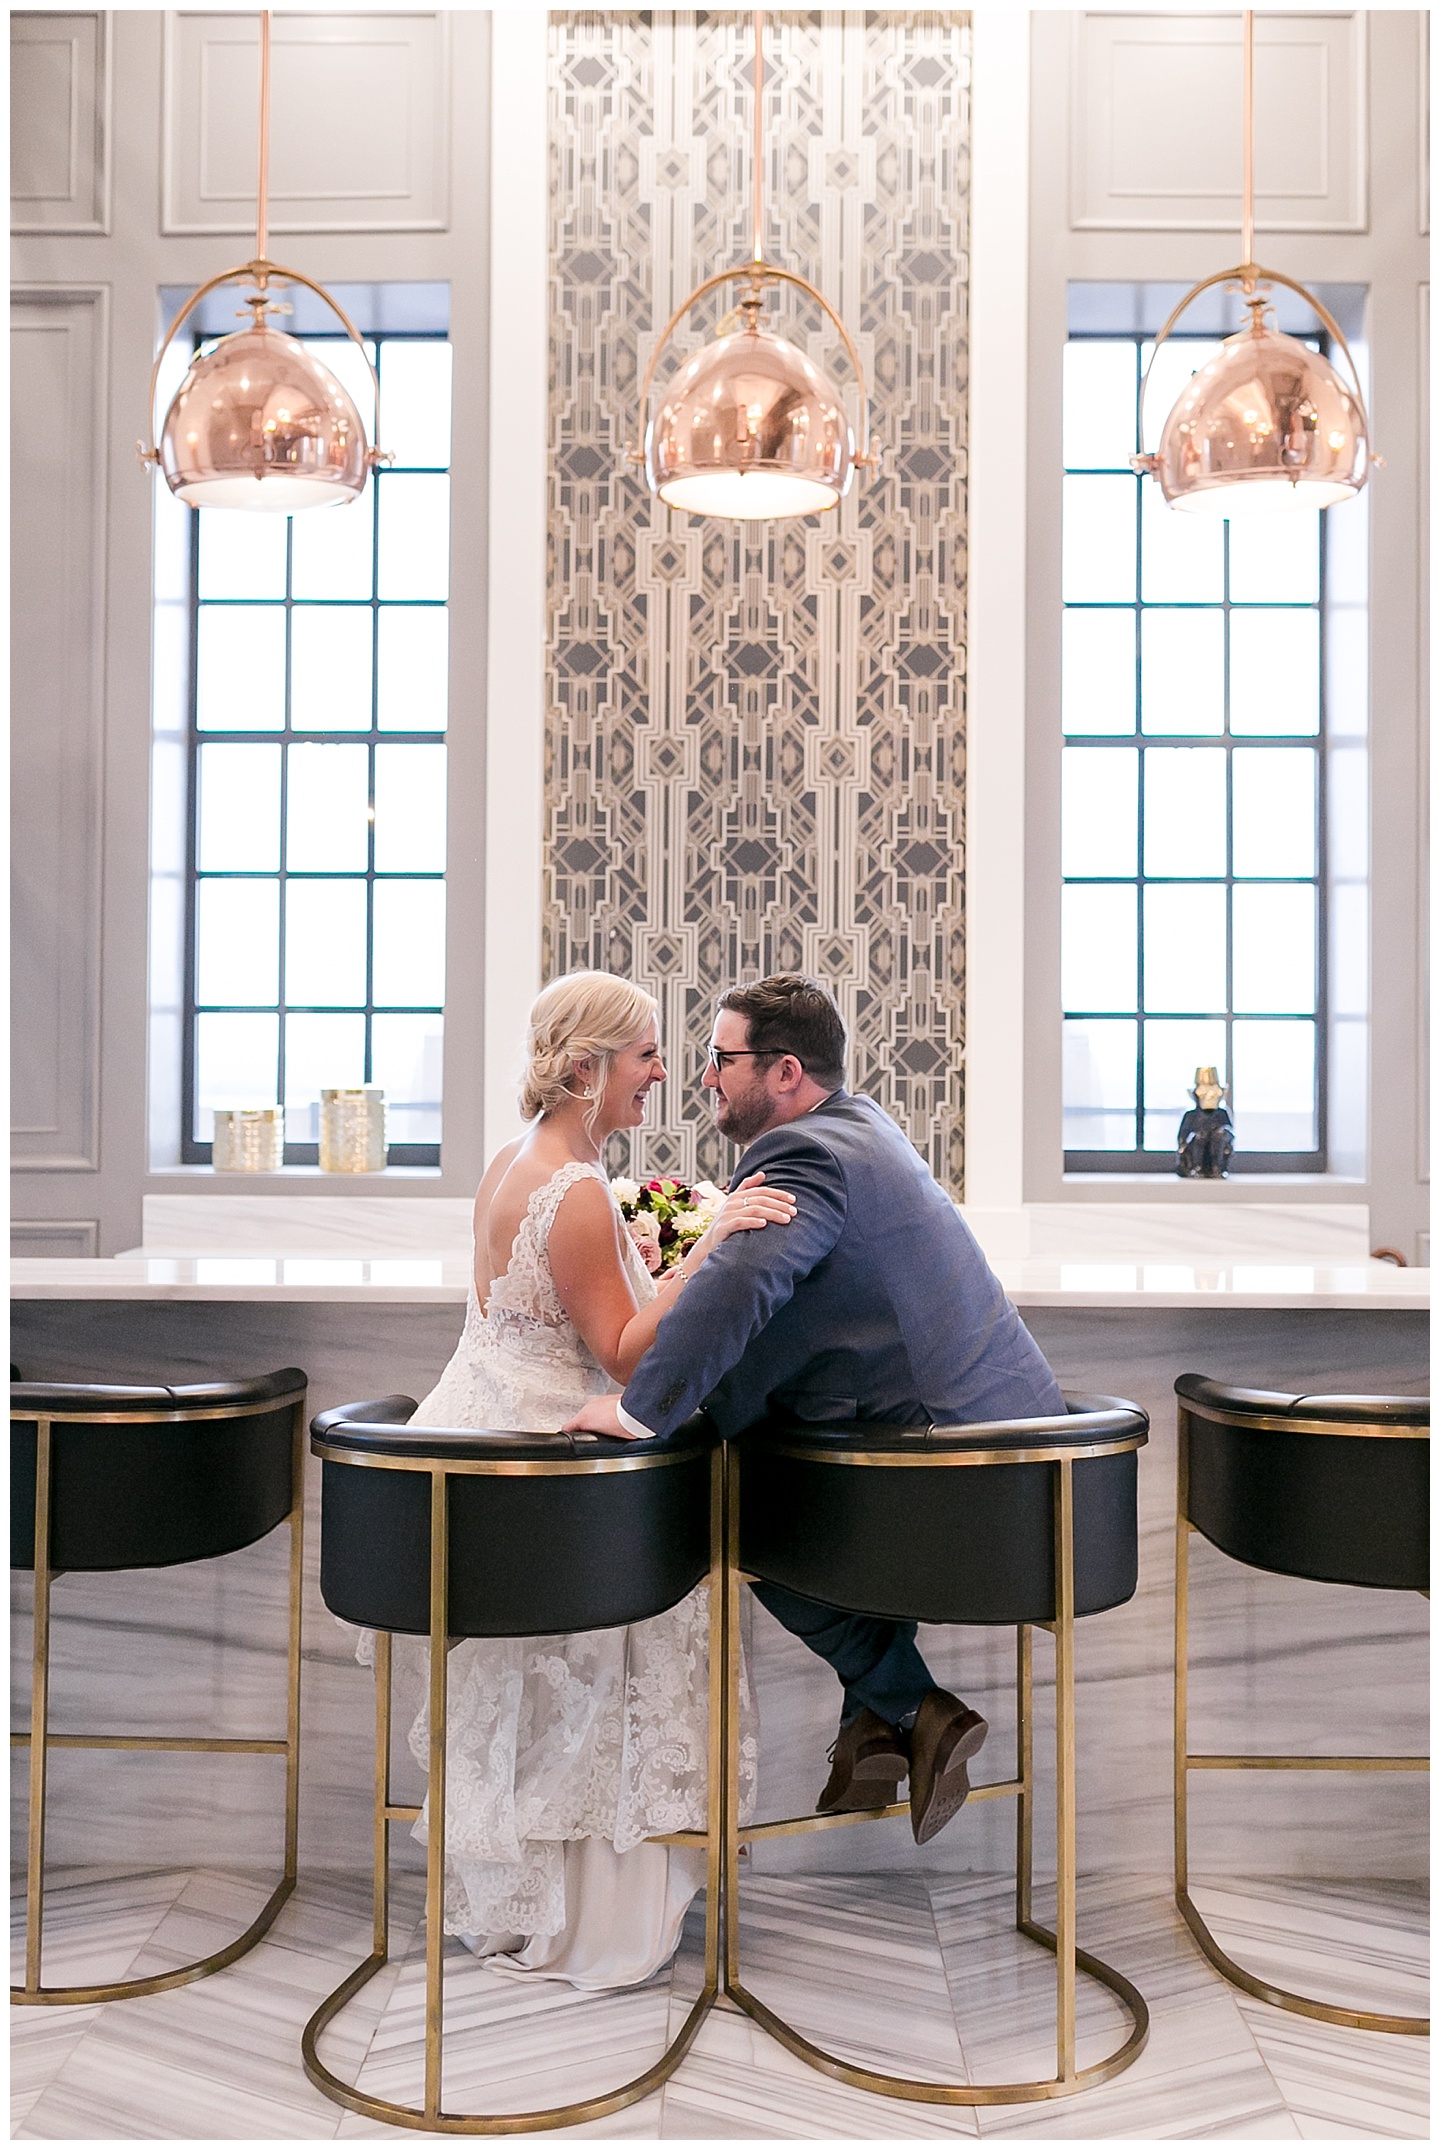 Nellie Sparkman Events | The Grand Hall at Power and Light